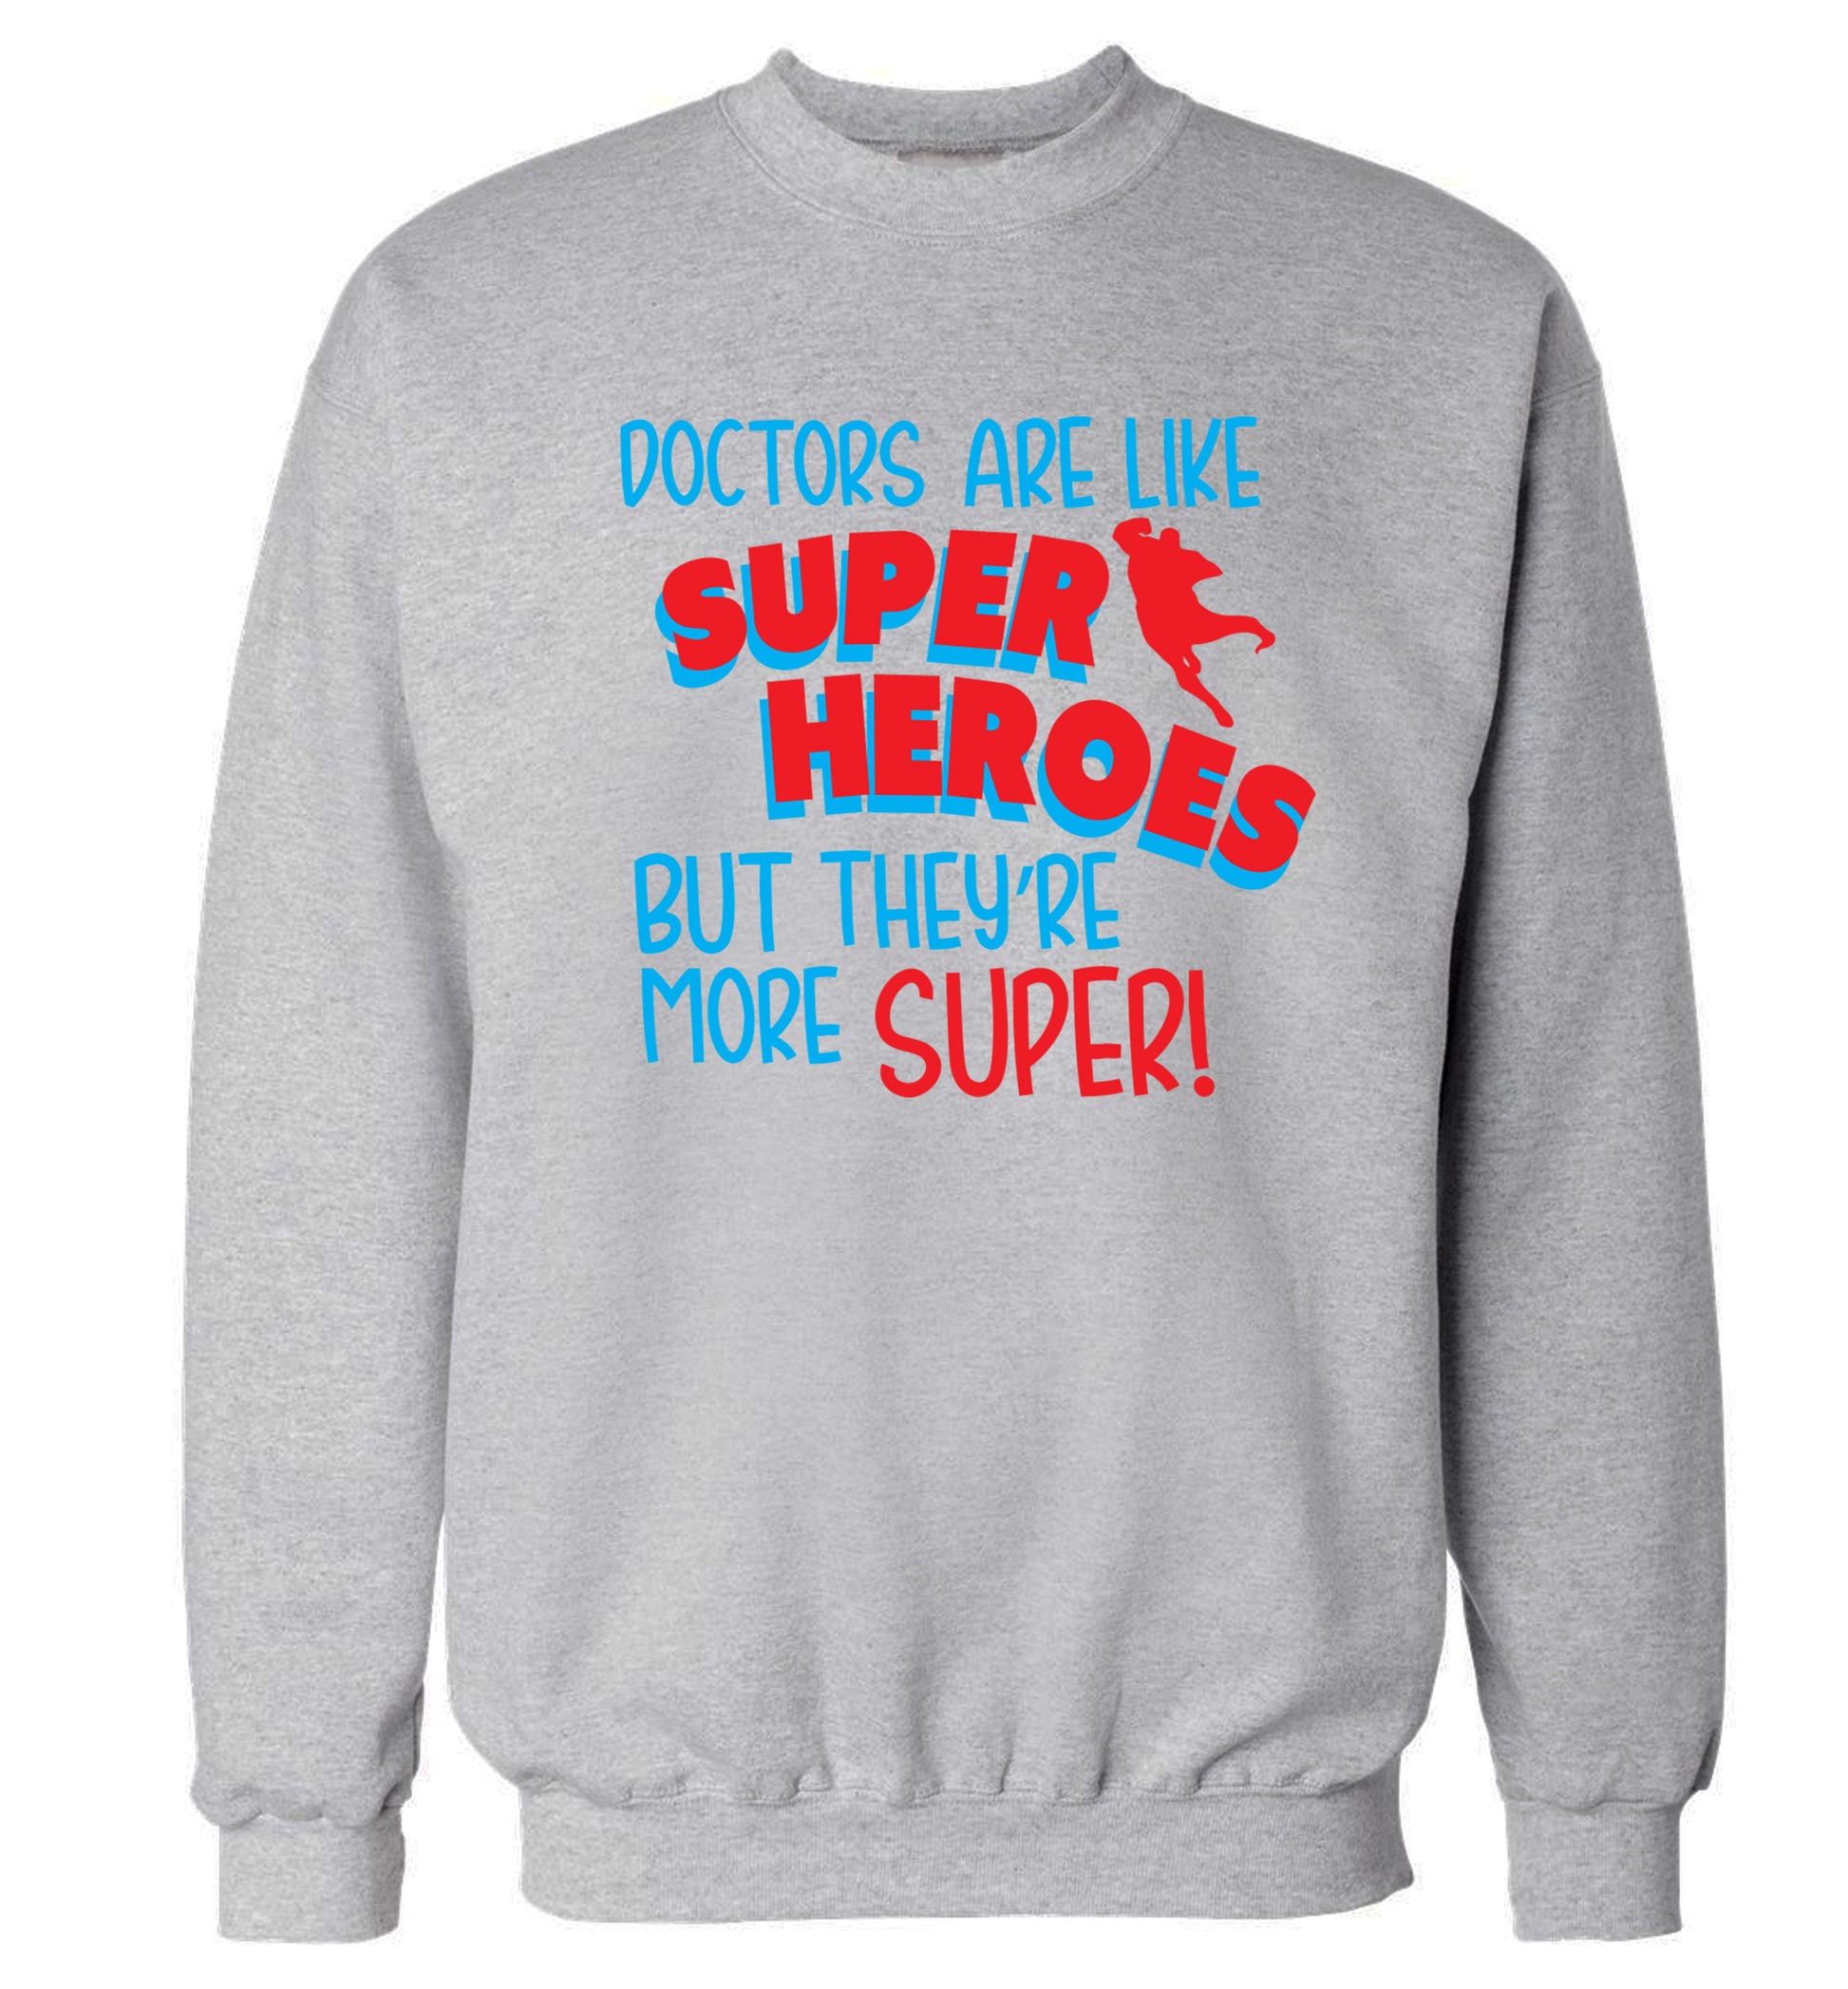 Doctors are like superheros but they're more super Adult's unisex grey Sweater 2XL